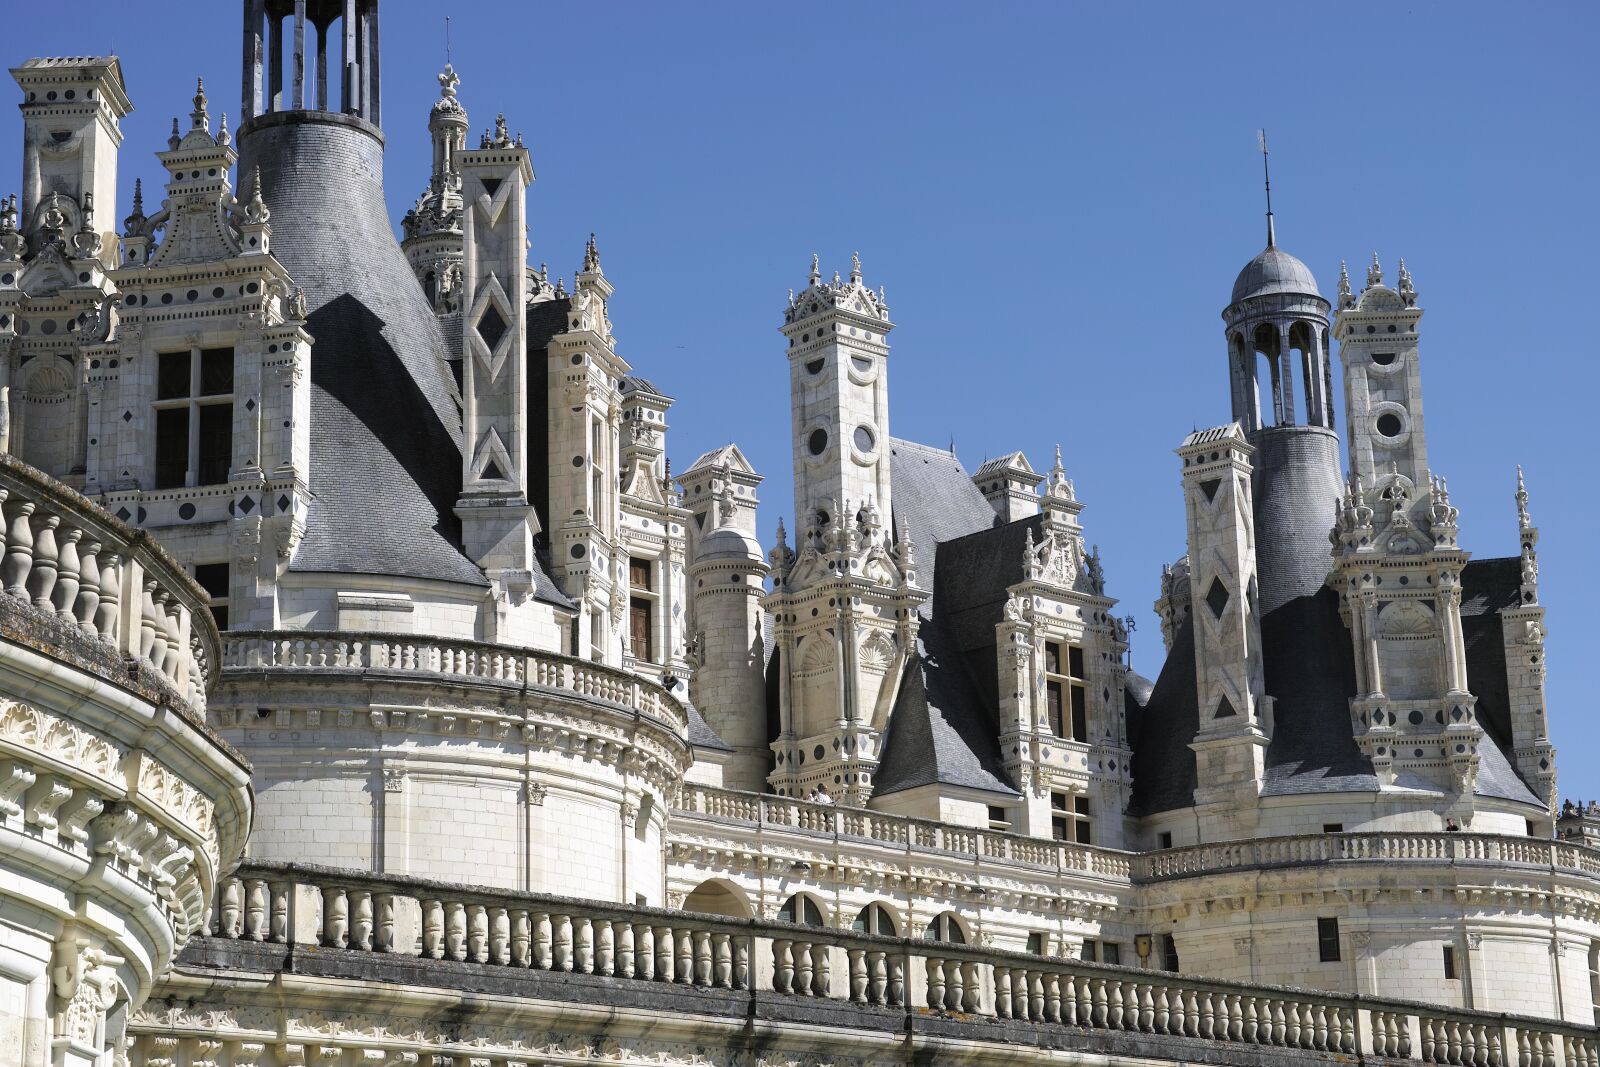 Sigma DP3 Merrill sample photo. Castle, chambord, roofing photography